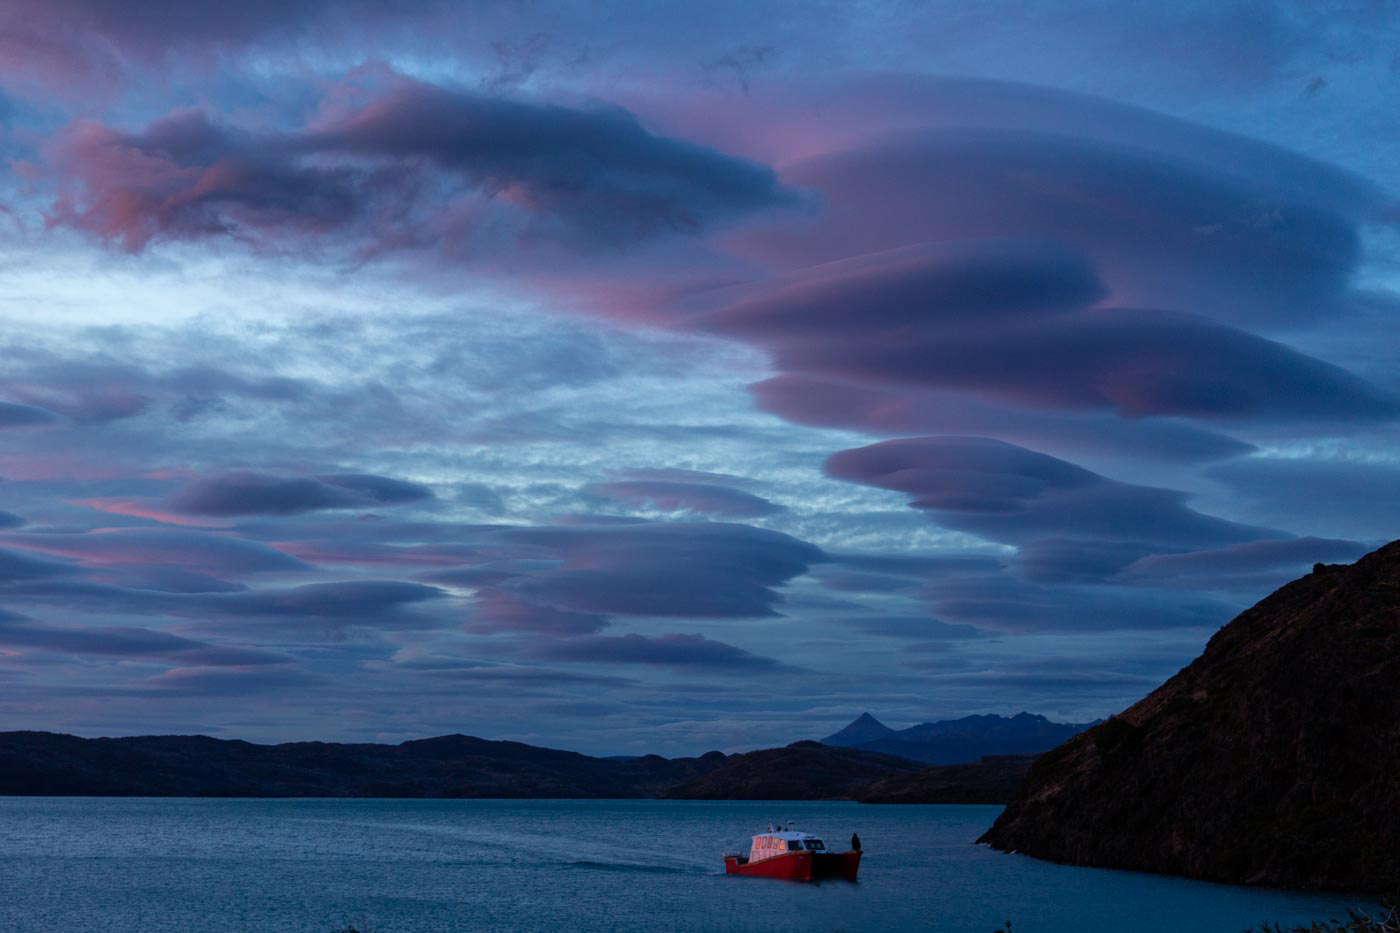 Early morning ferry, Torres del Paine, Chile.